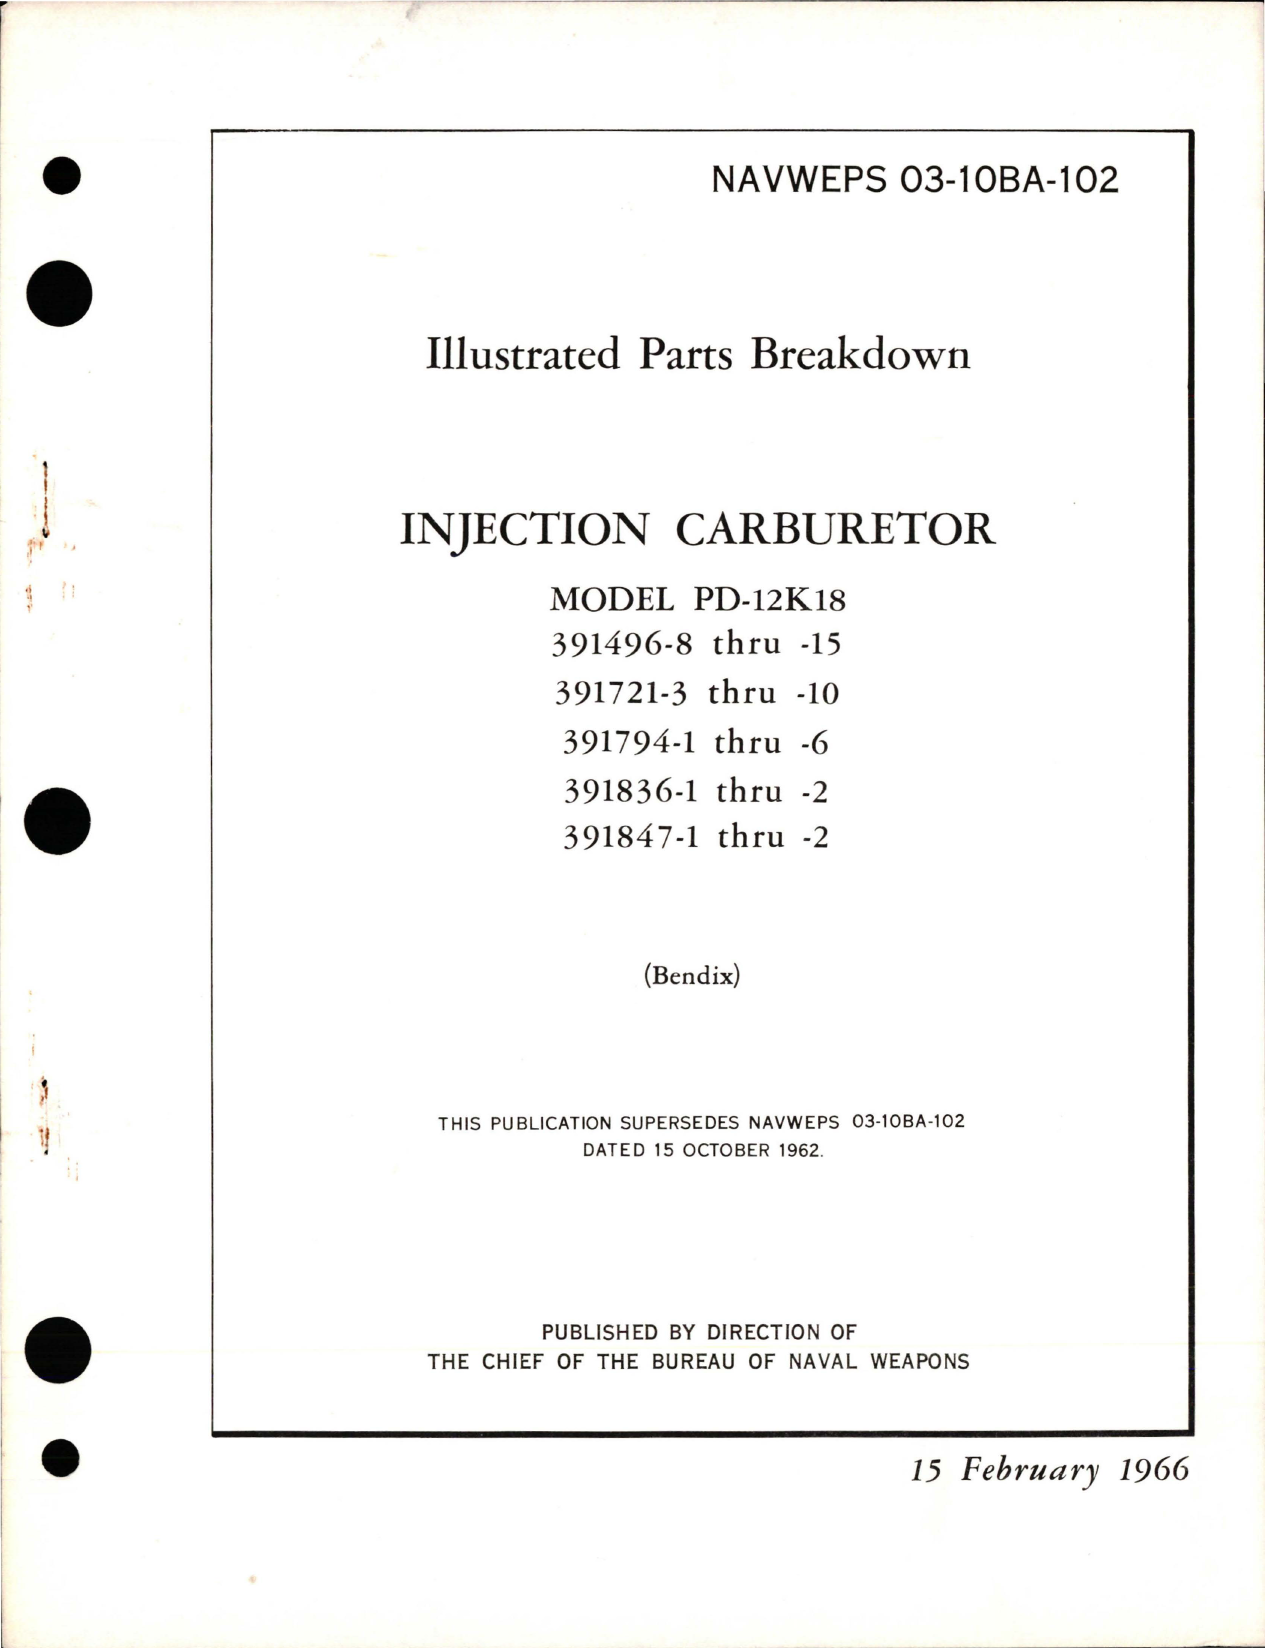 Sample page 1 from AirCorps Library document: Illustrated Parts Breakdown for Injection Carburetor - Model PD-12K18